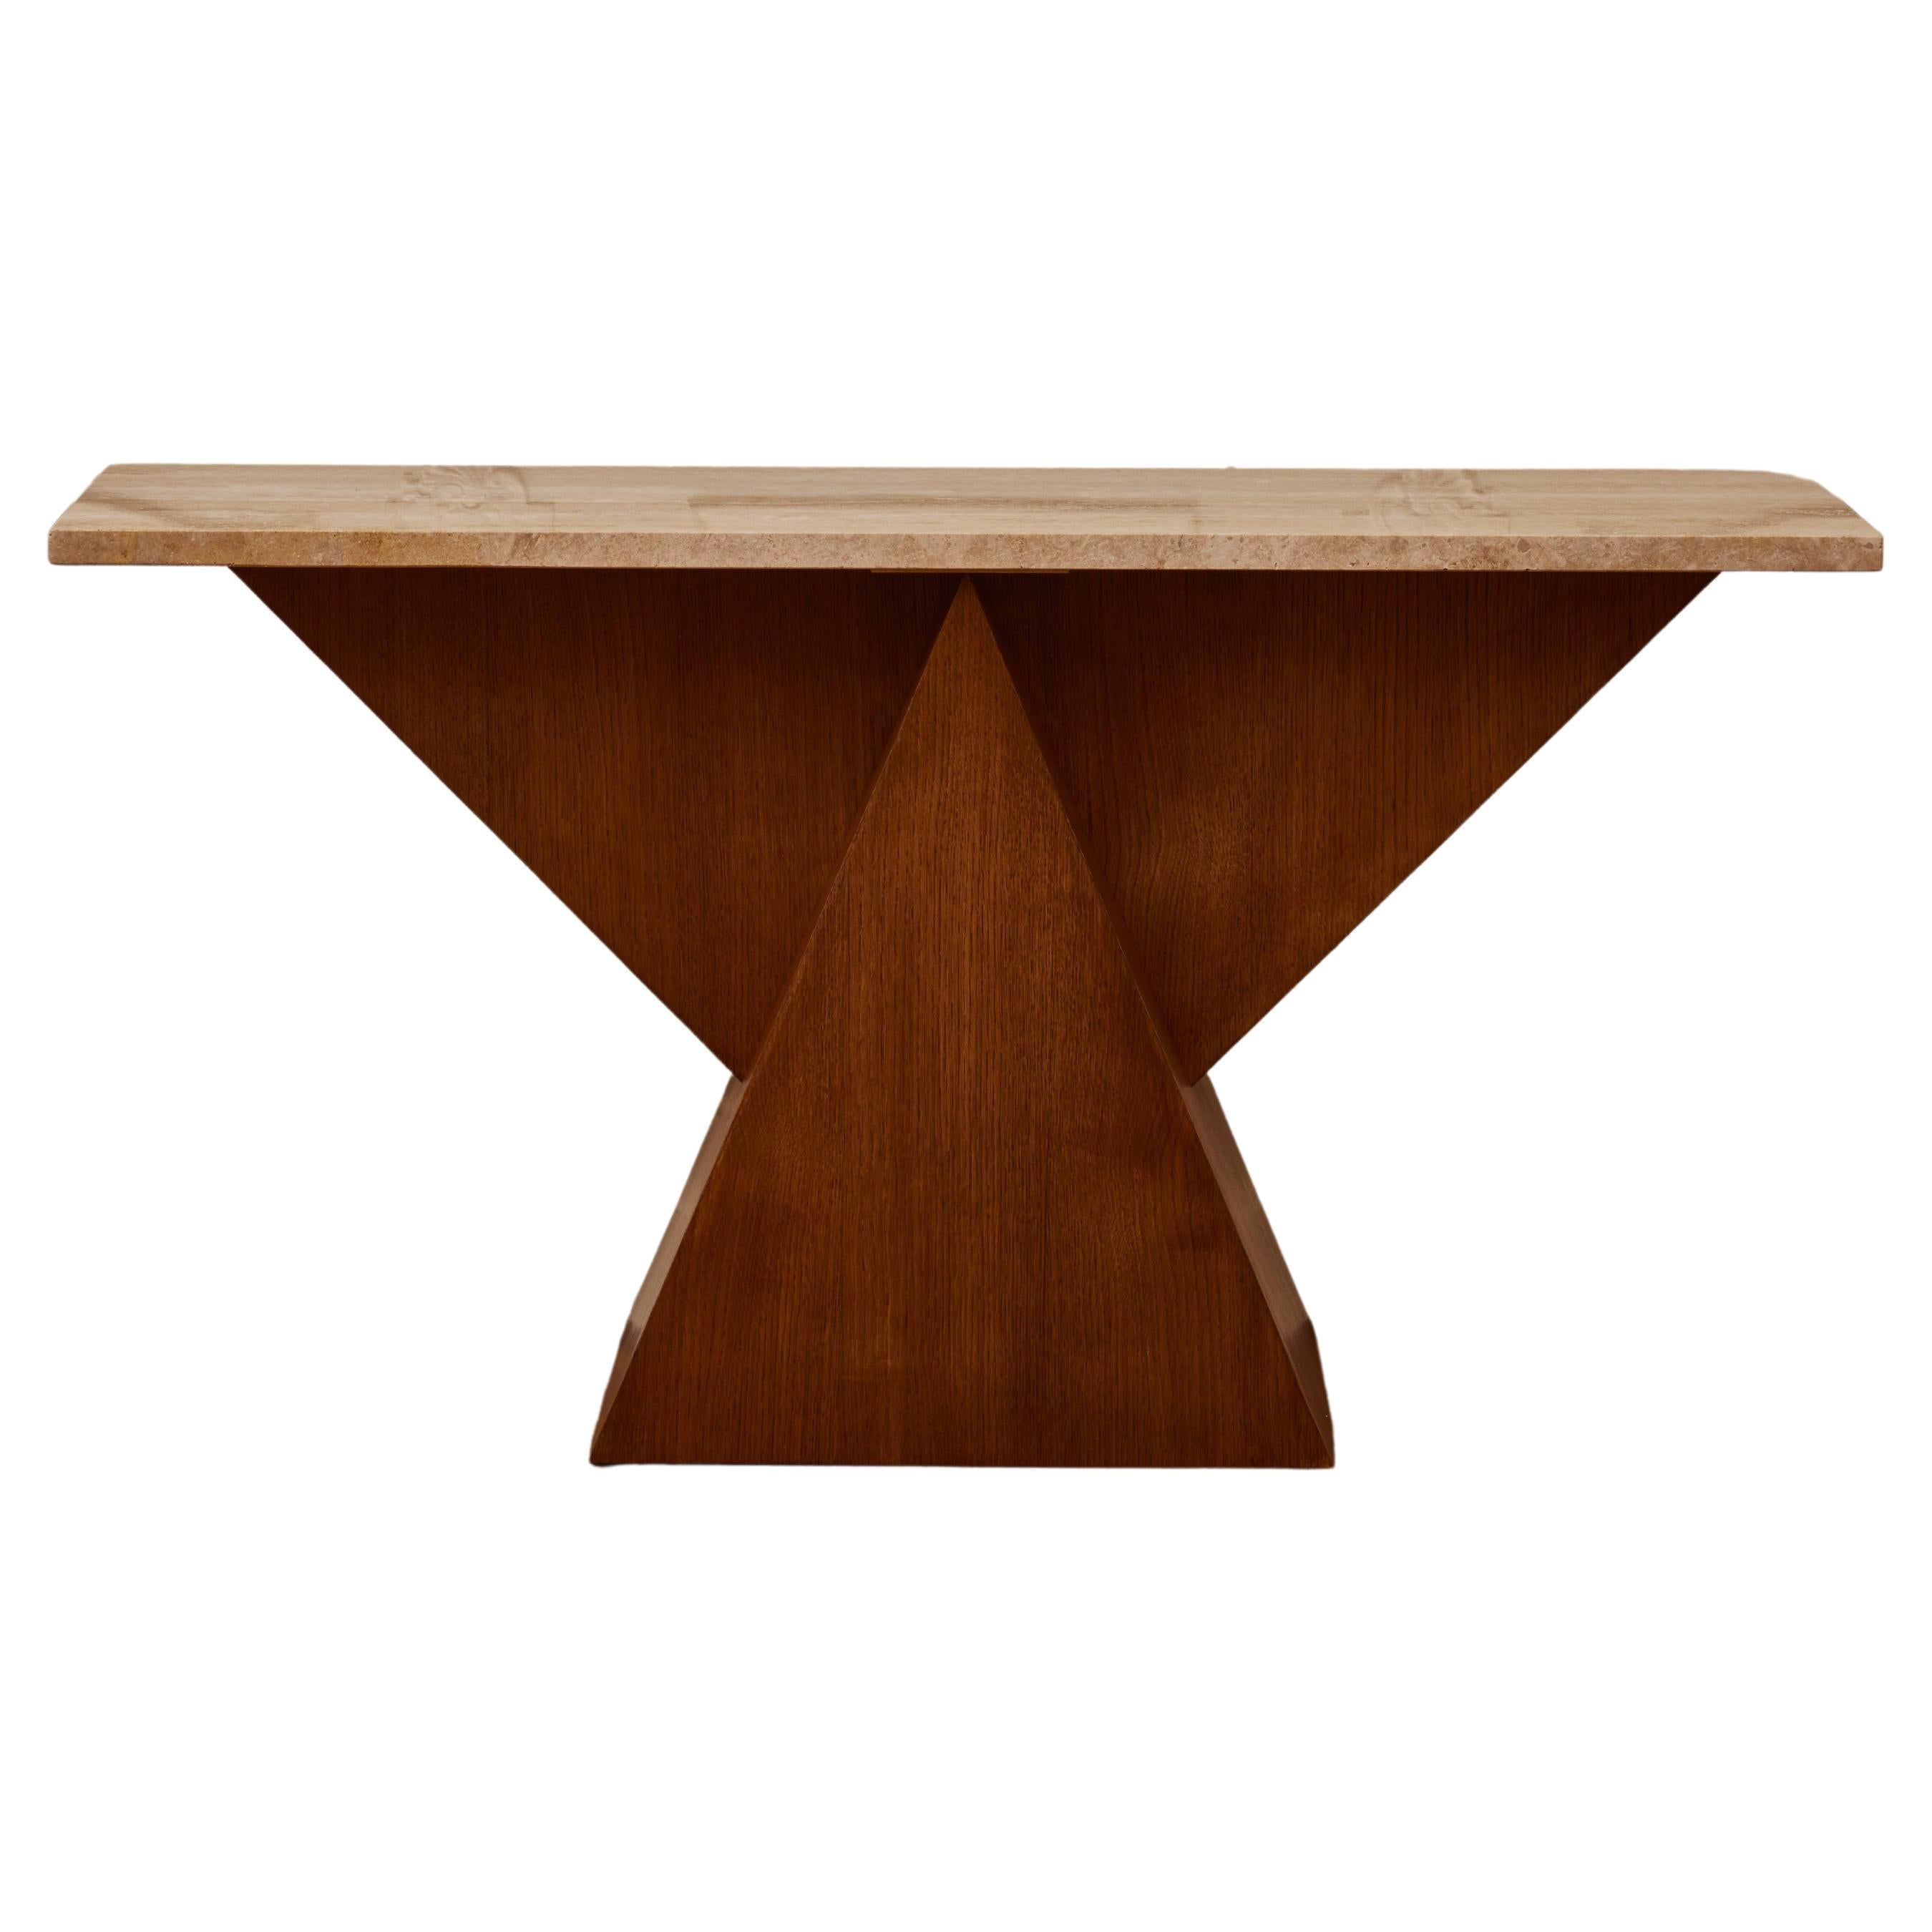 Wood and travertine stone table by Studio Glustin For Sale